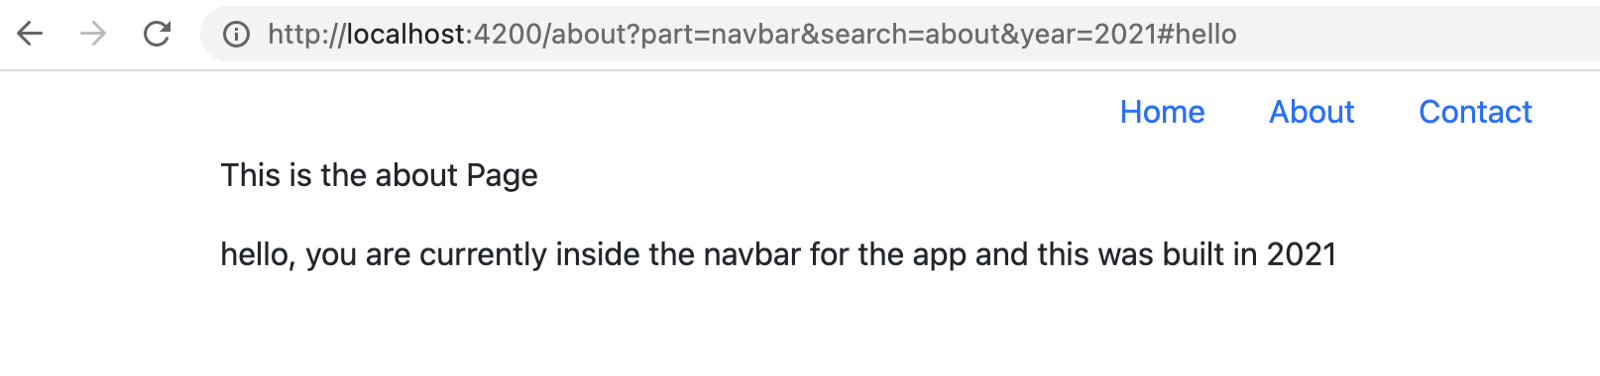 The About page now says,  ‘This is the about page. hello, you are currently inside the navbar for the app and this was built in 2021’